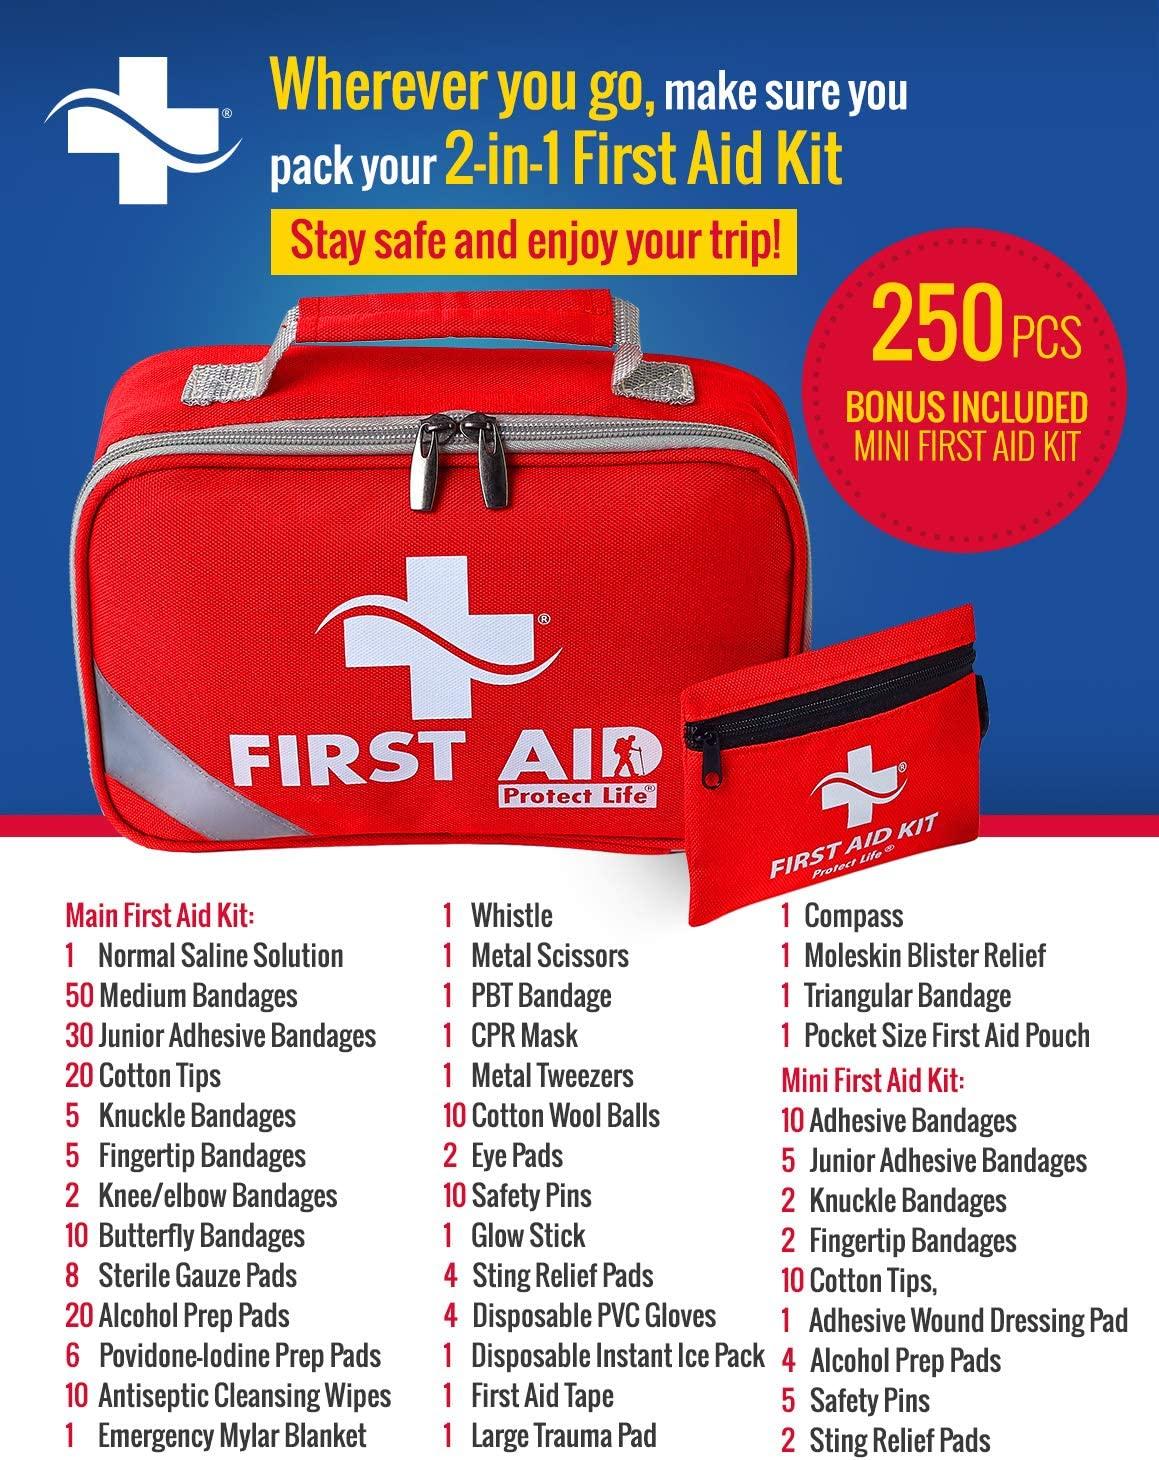 2-in-1 First Aid Kit for Car - 250 Piece - First Aid Kits for